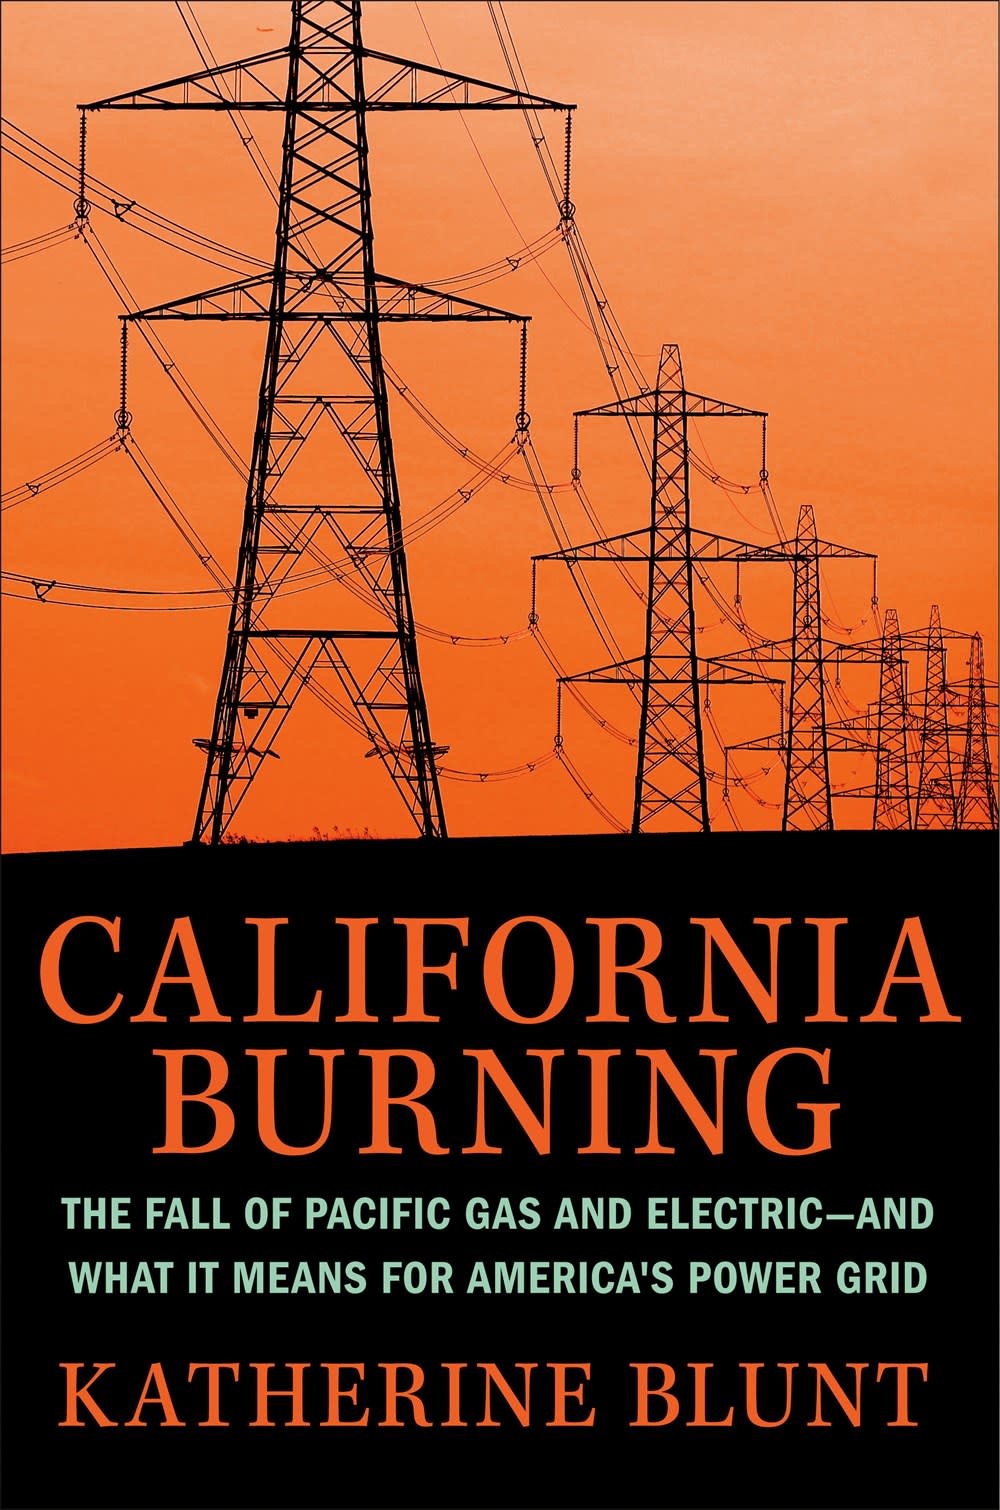 Portfolio California Burning: The Fall of Pacific Gas and Electric and What It Means for America's Power Grid